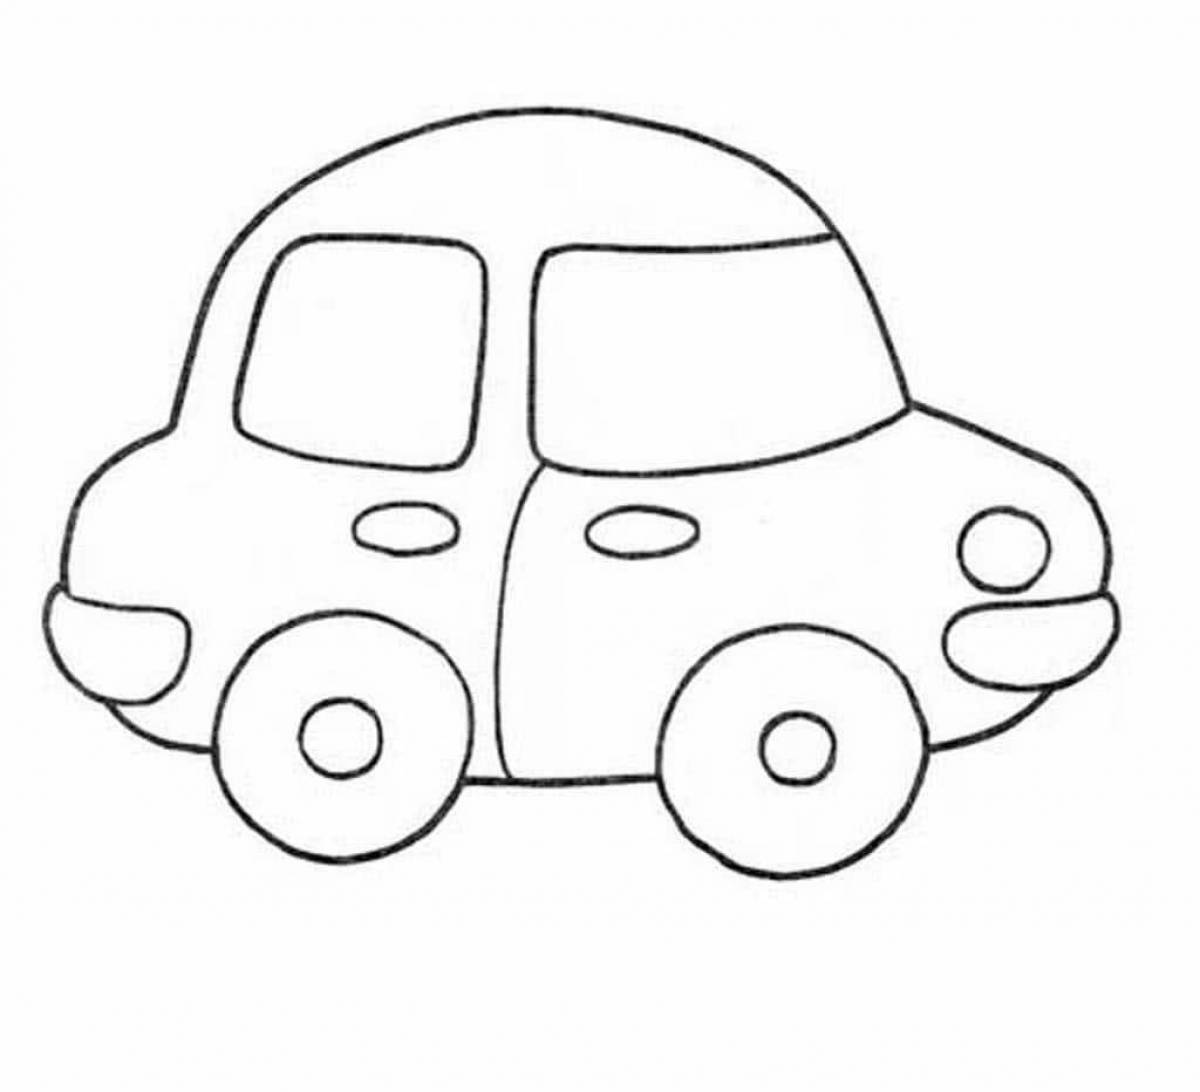 Coloring pages with cars for children 2-3 years old